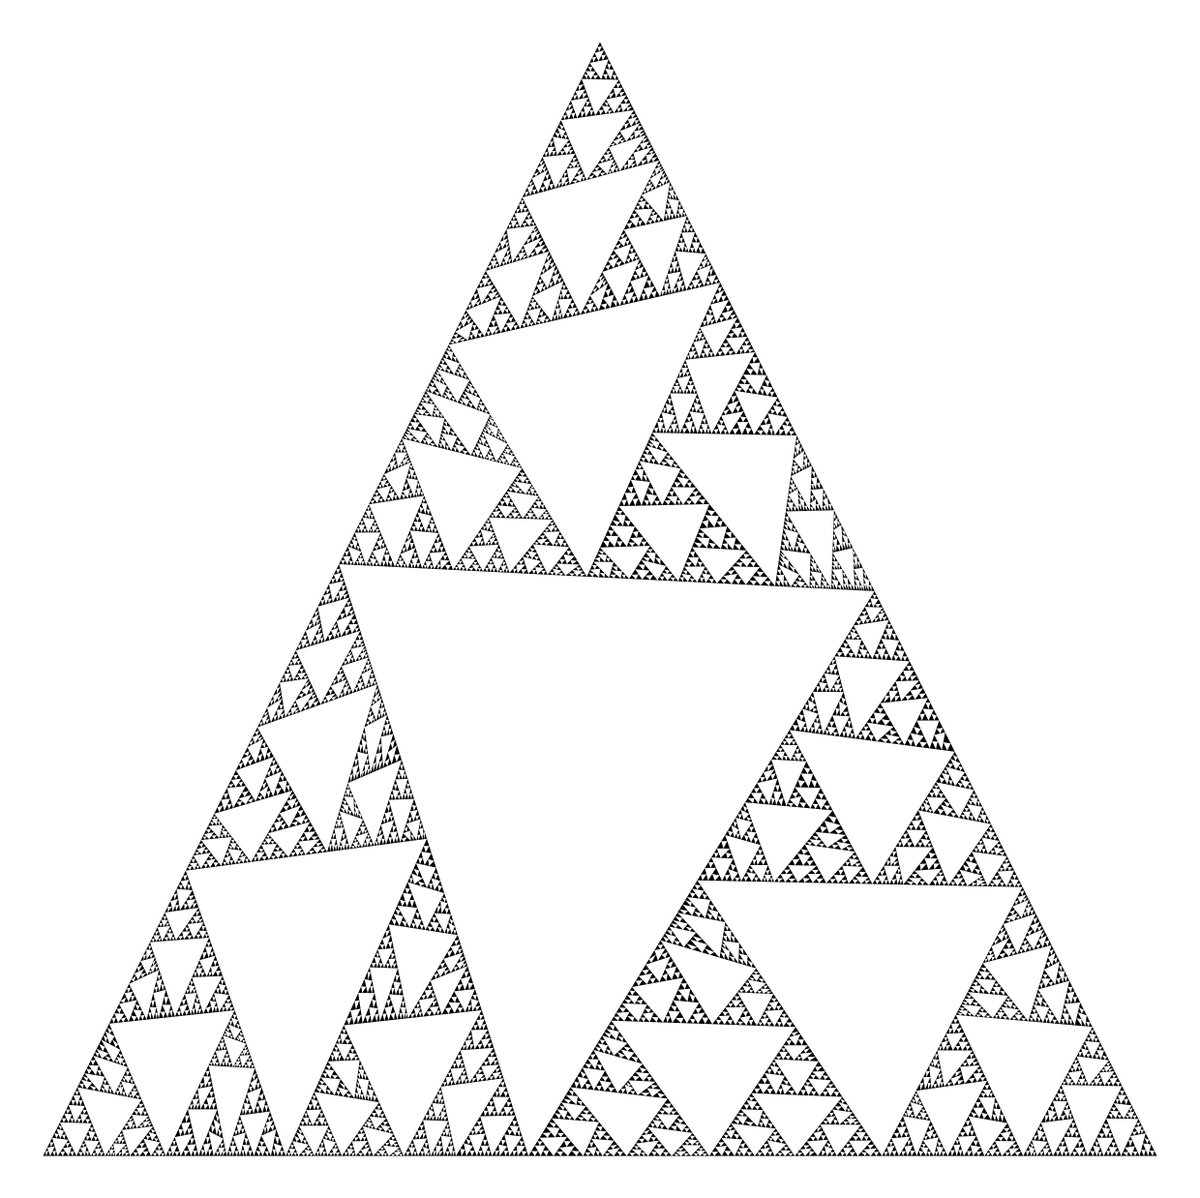 'Drunk Sierpinski': Instead of picking the midpoints of the sides of the triangles to make the triangle-holes, I chose points via a normal distribution, mean = midpoint, SD = 5% of length #mathart #Mathematica